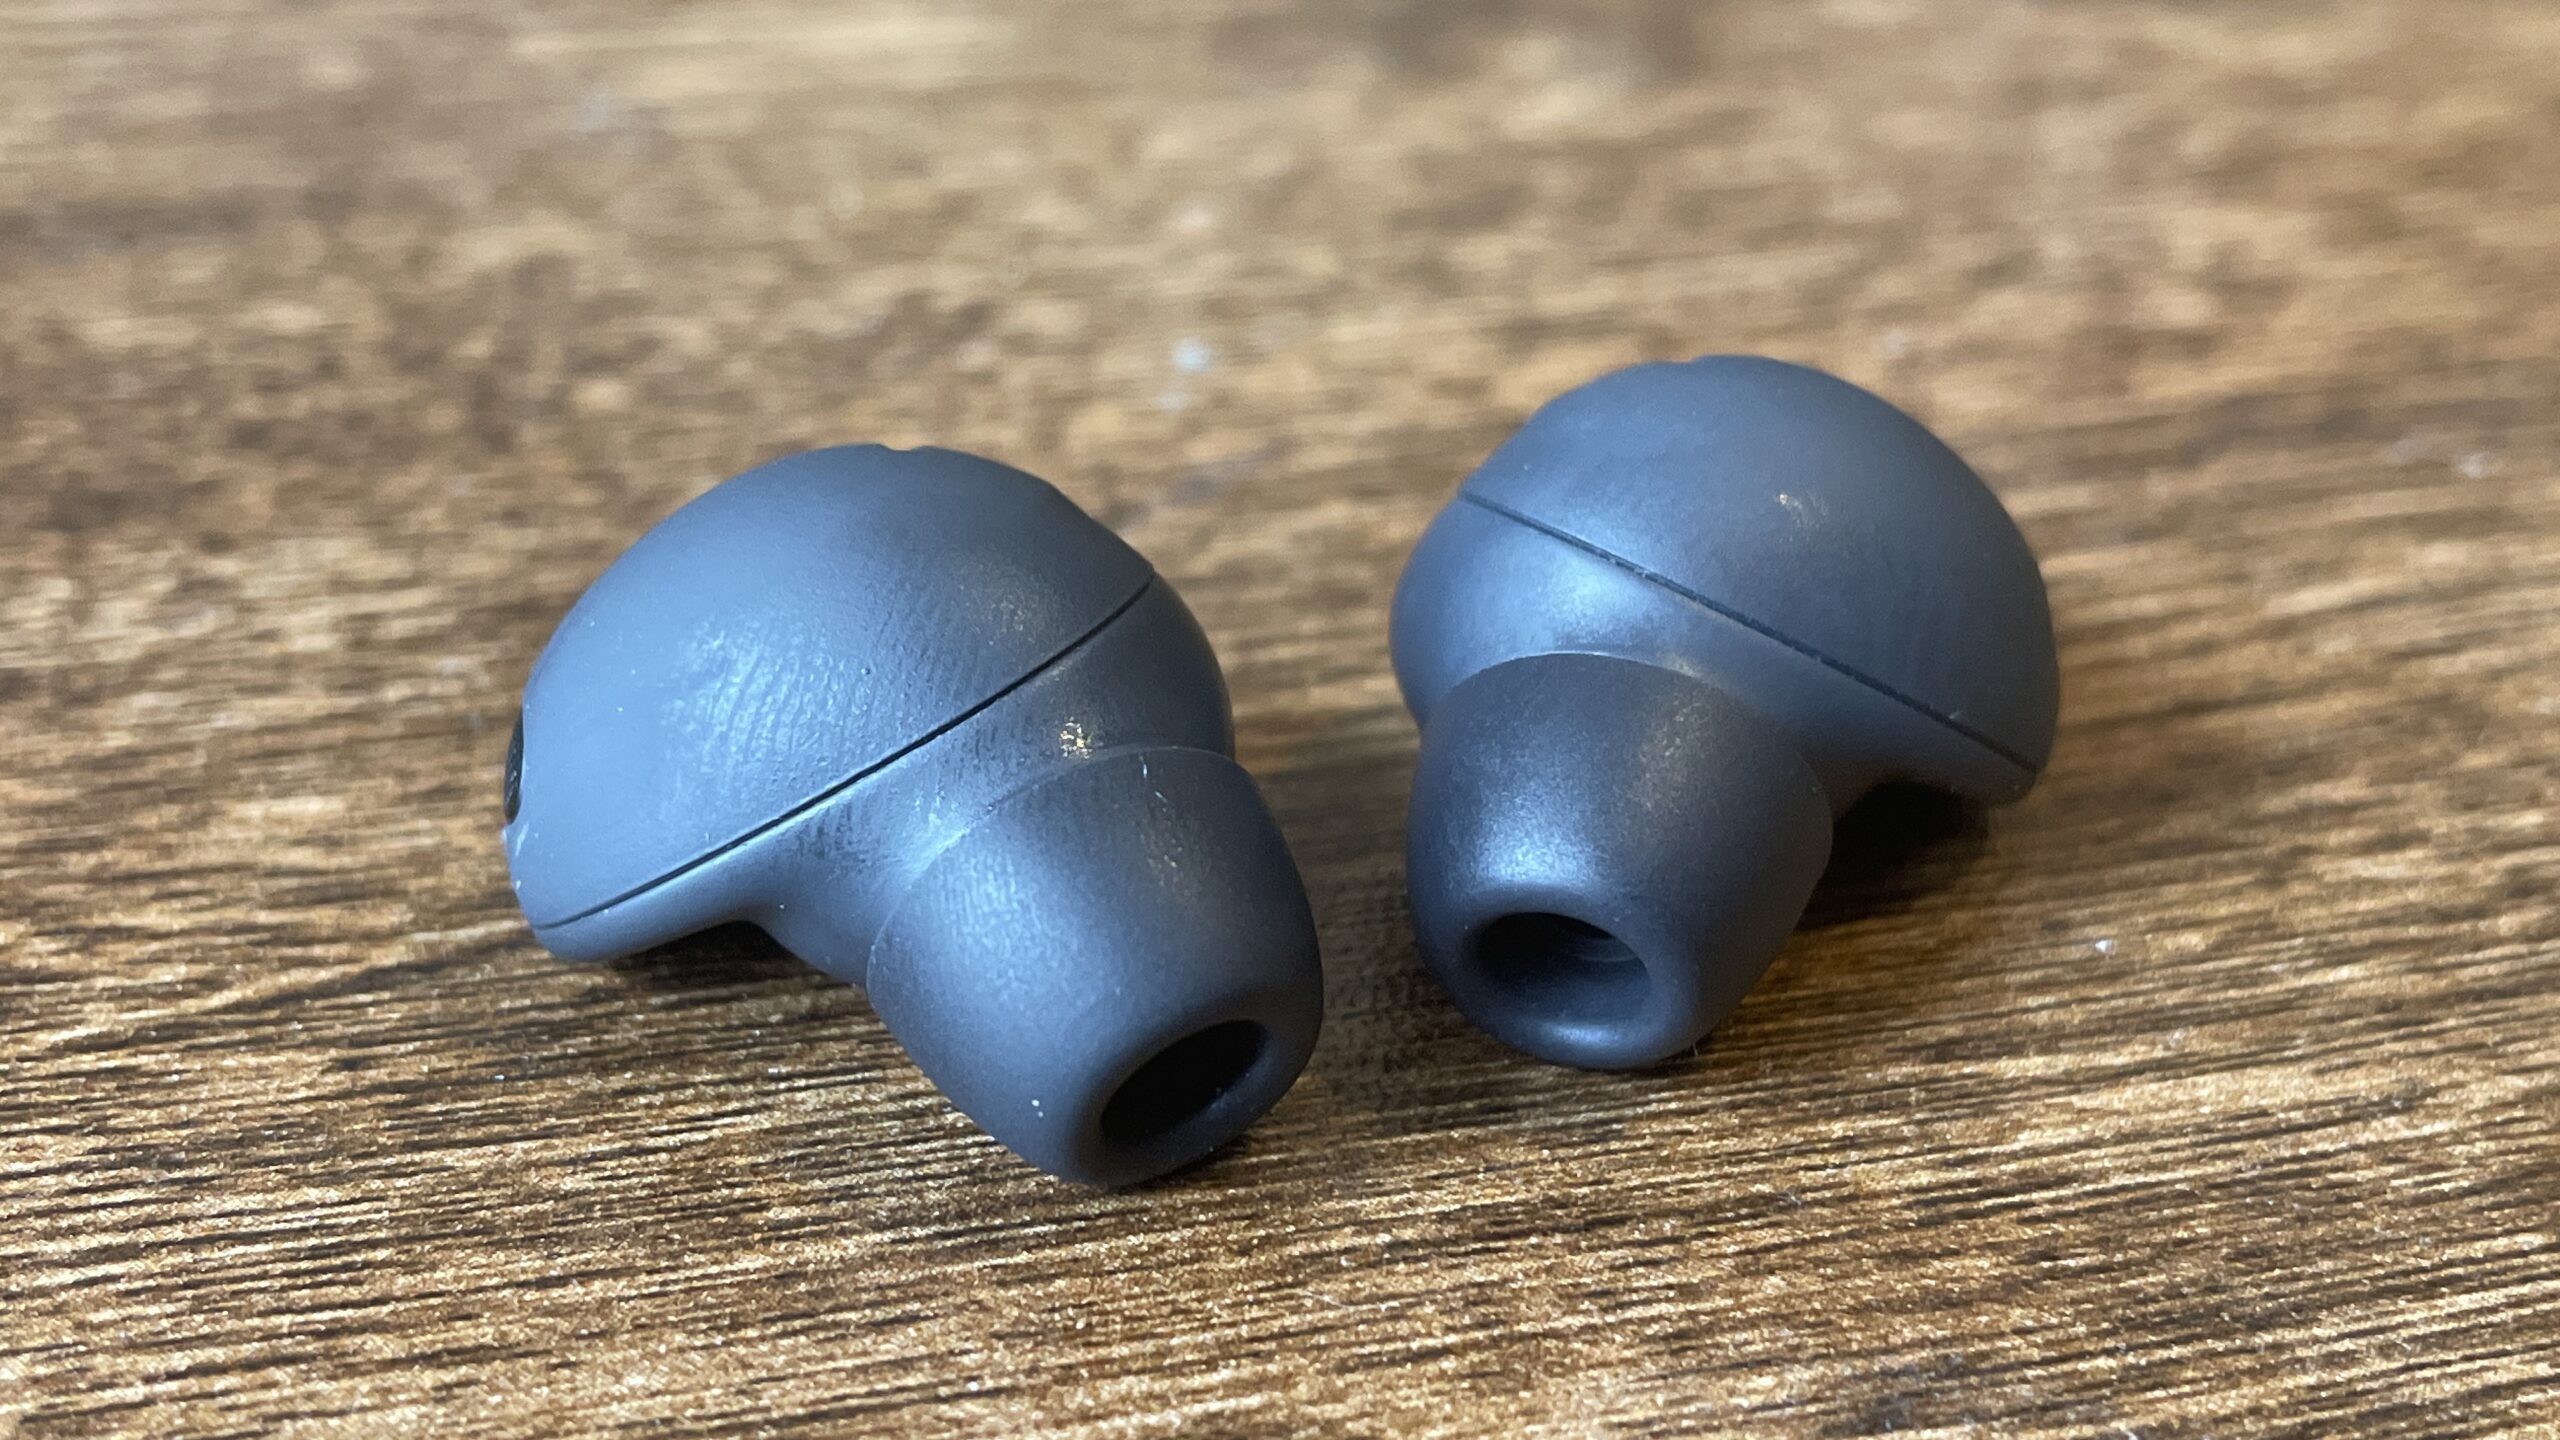 Samsung Galaxy Buds2 Pro earbuds review | Popular Science